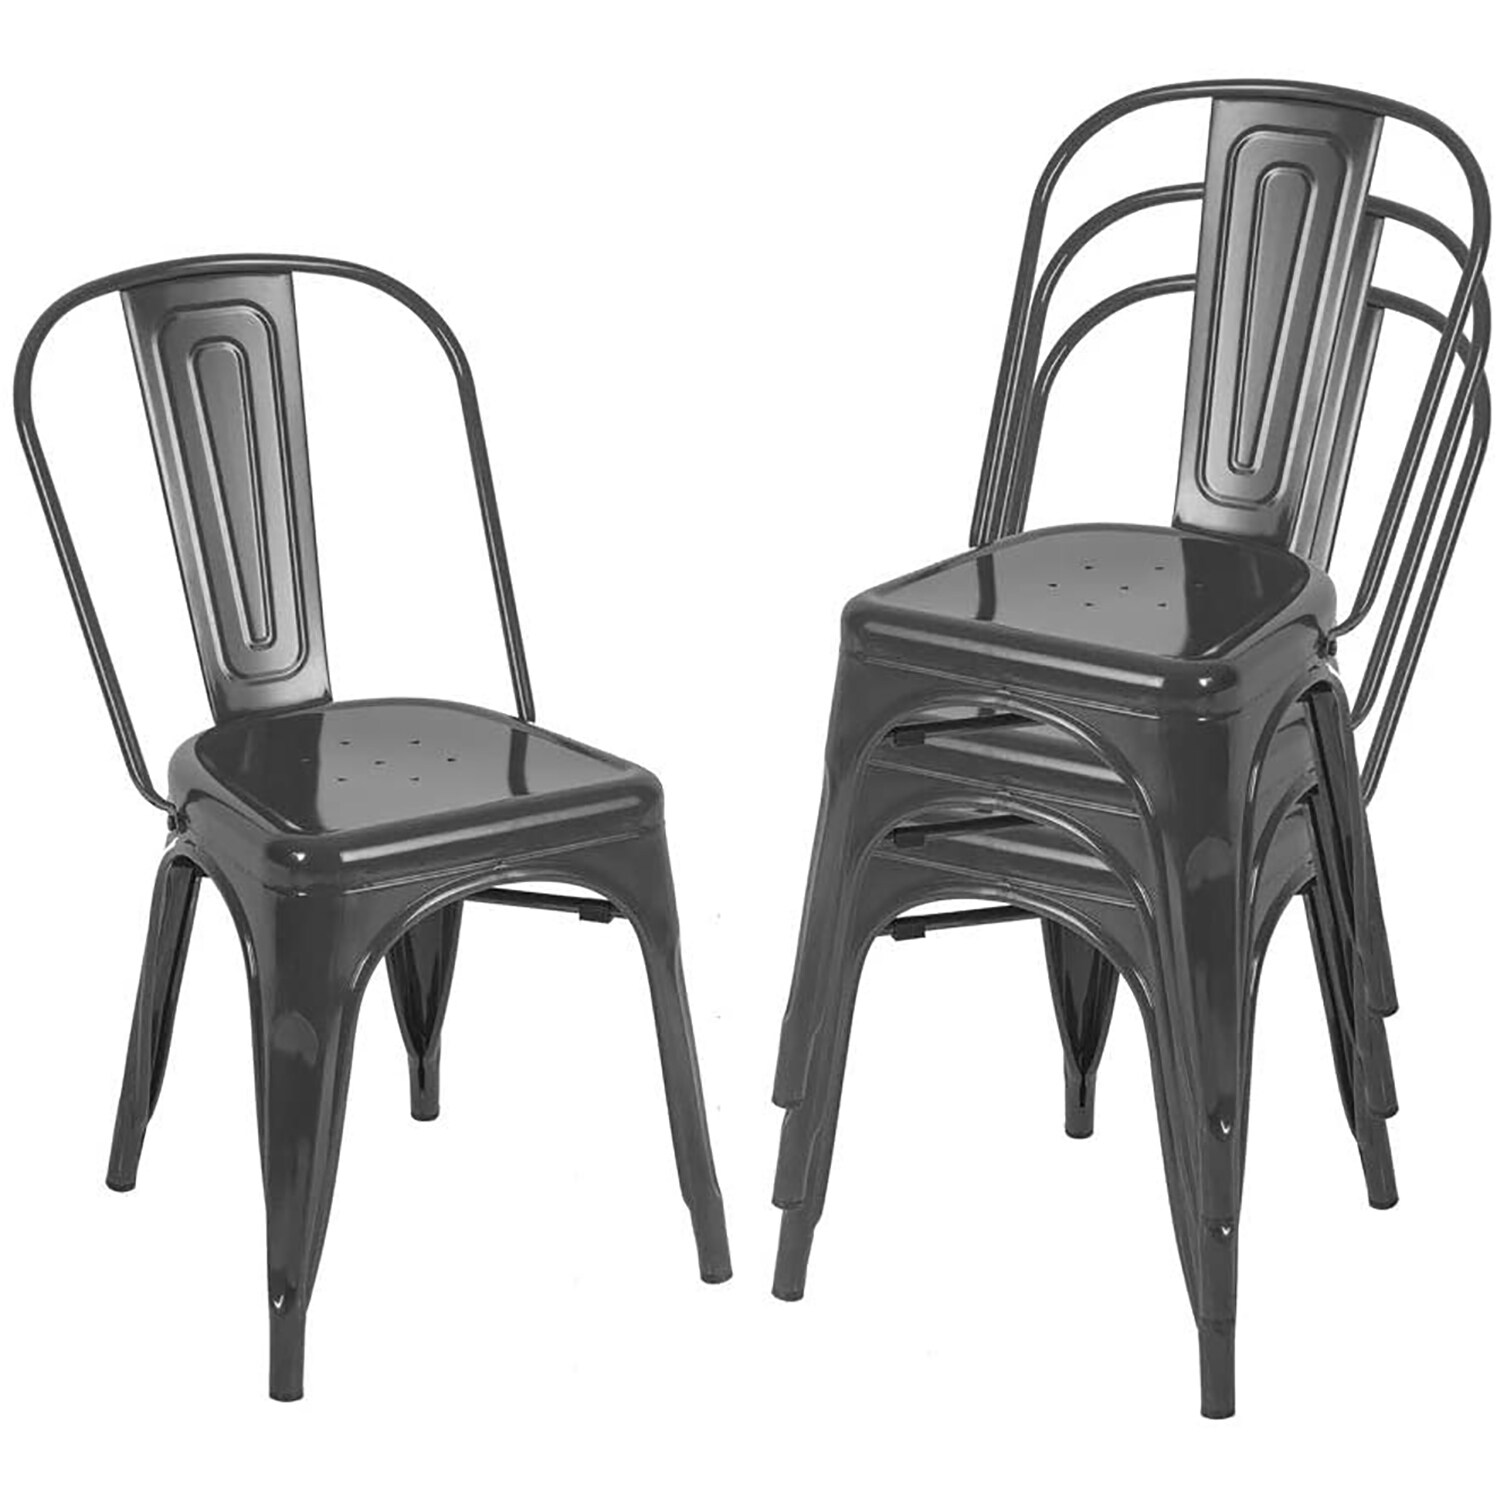 Kitchen Dining Room Chairs Stackable, Heavy Duty Metal Dining Room Chairs